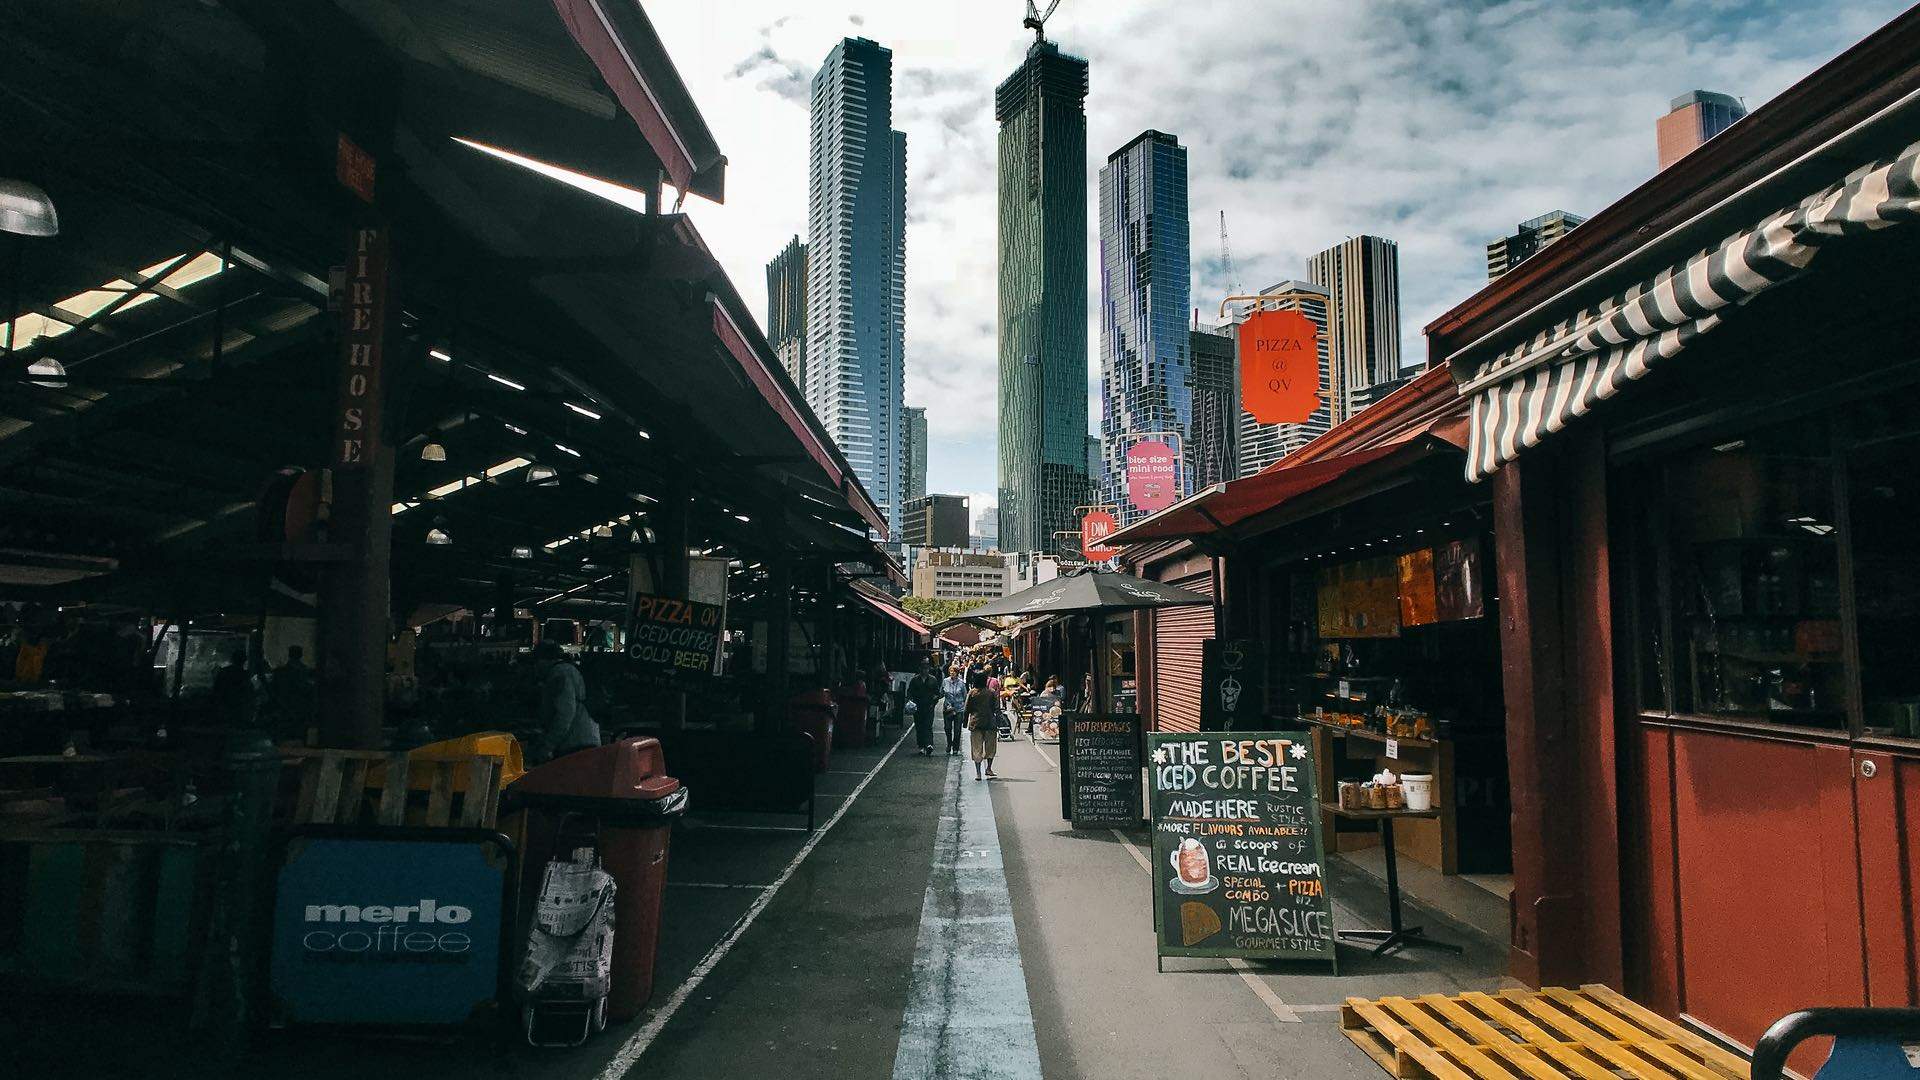 The City of Melbourne Is Giving Away $100,000 in Vouchers to Use at the Queen Victoria Market